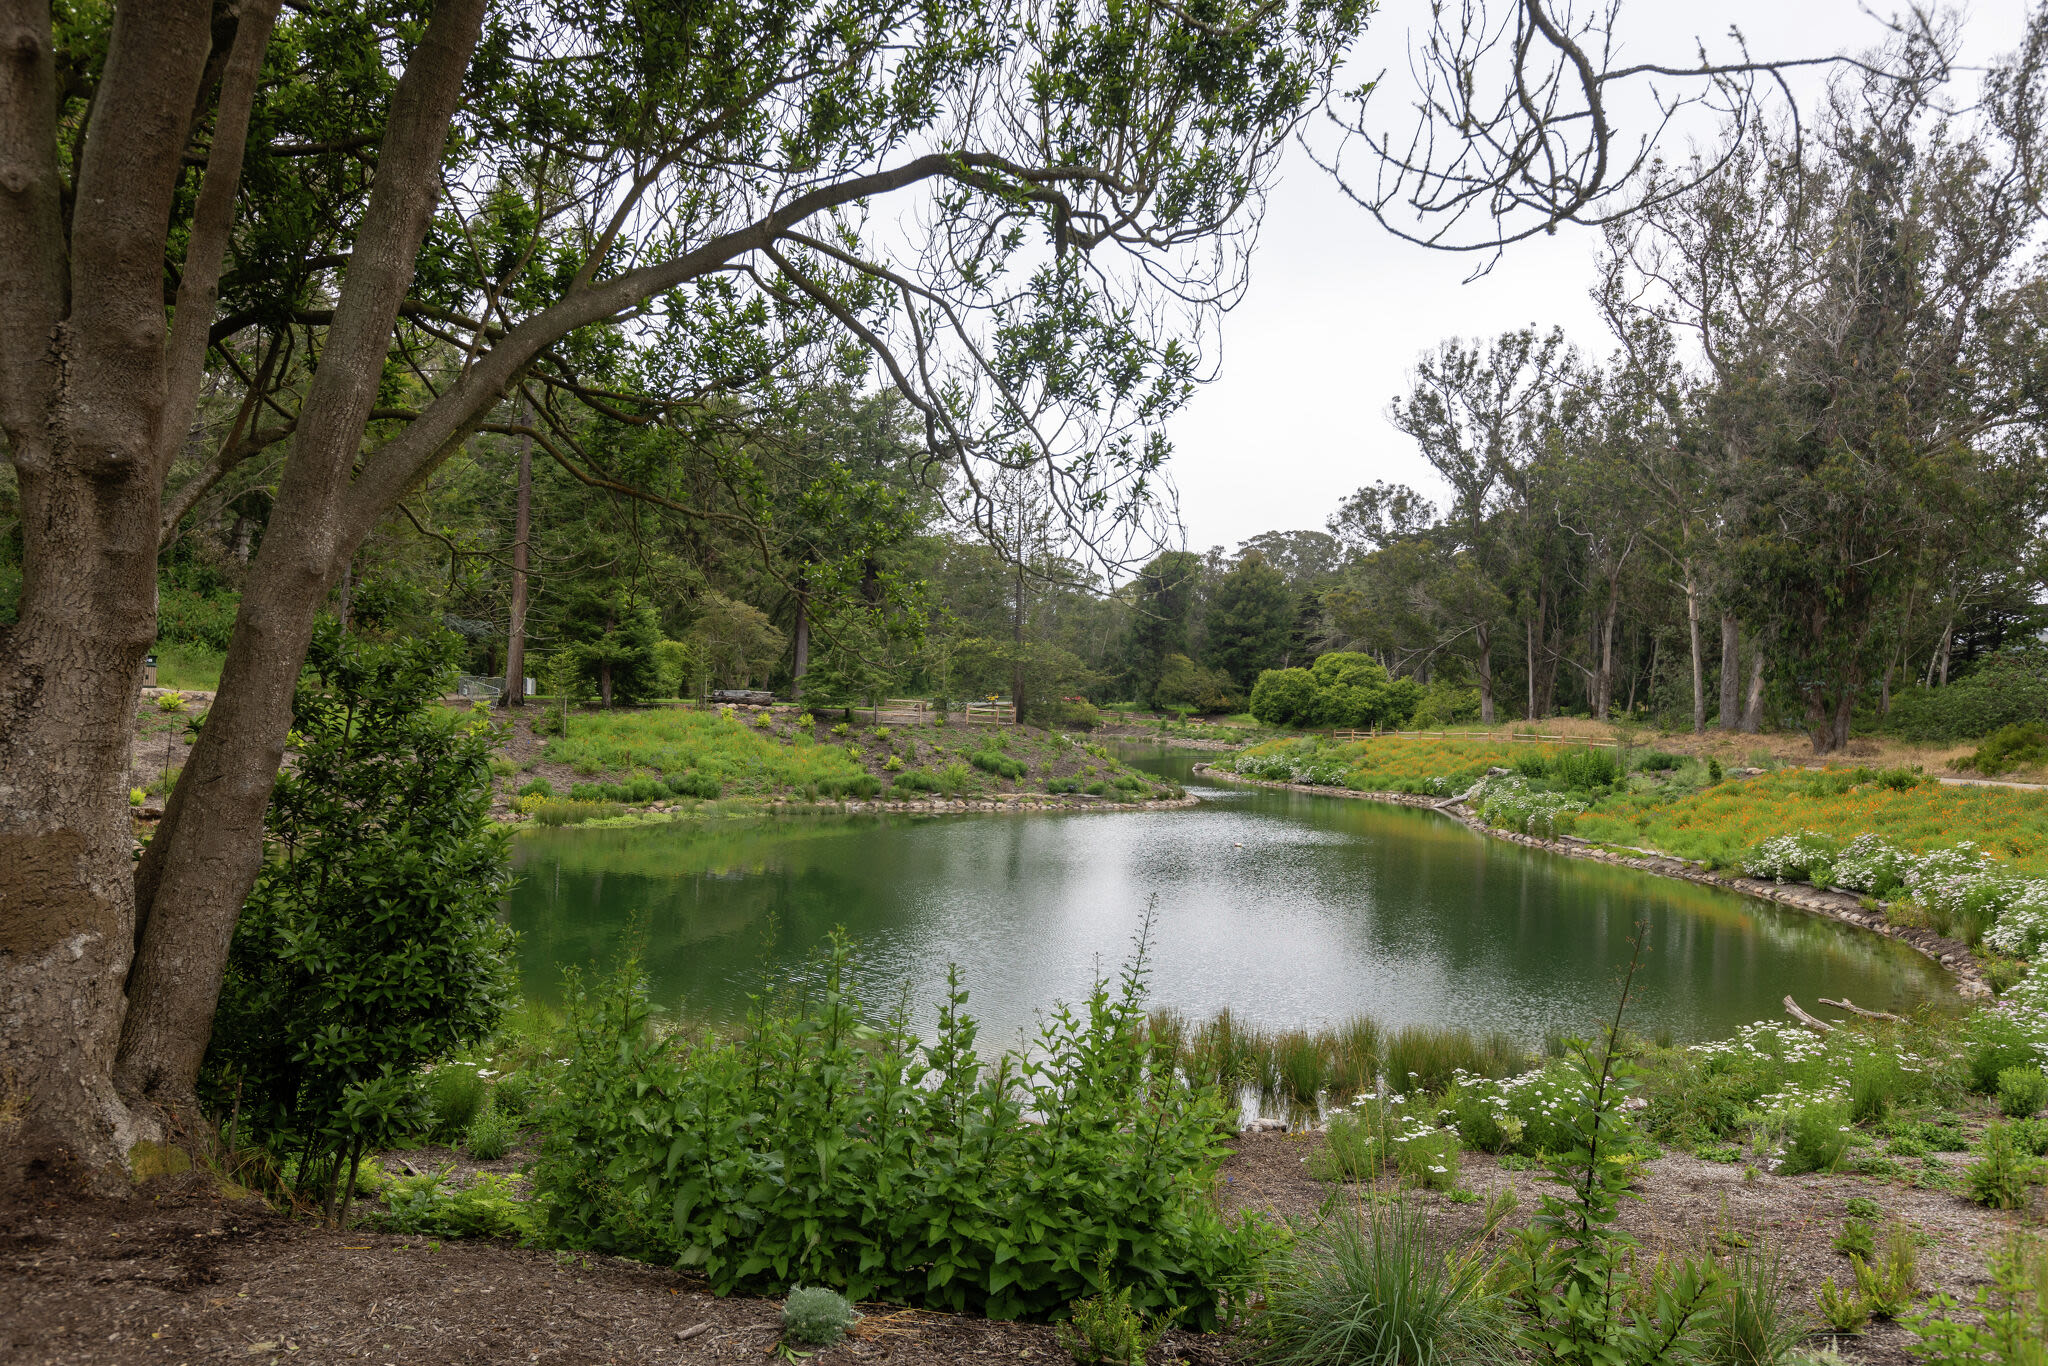 Golden Gate Park tests new visitor feature at renovated lake